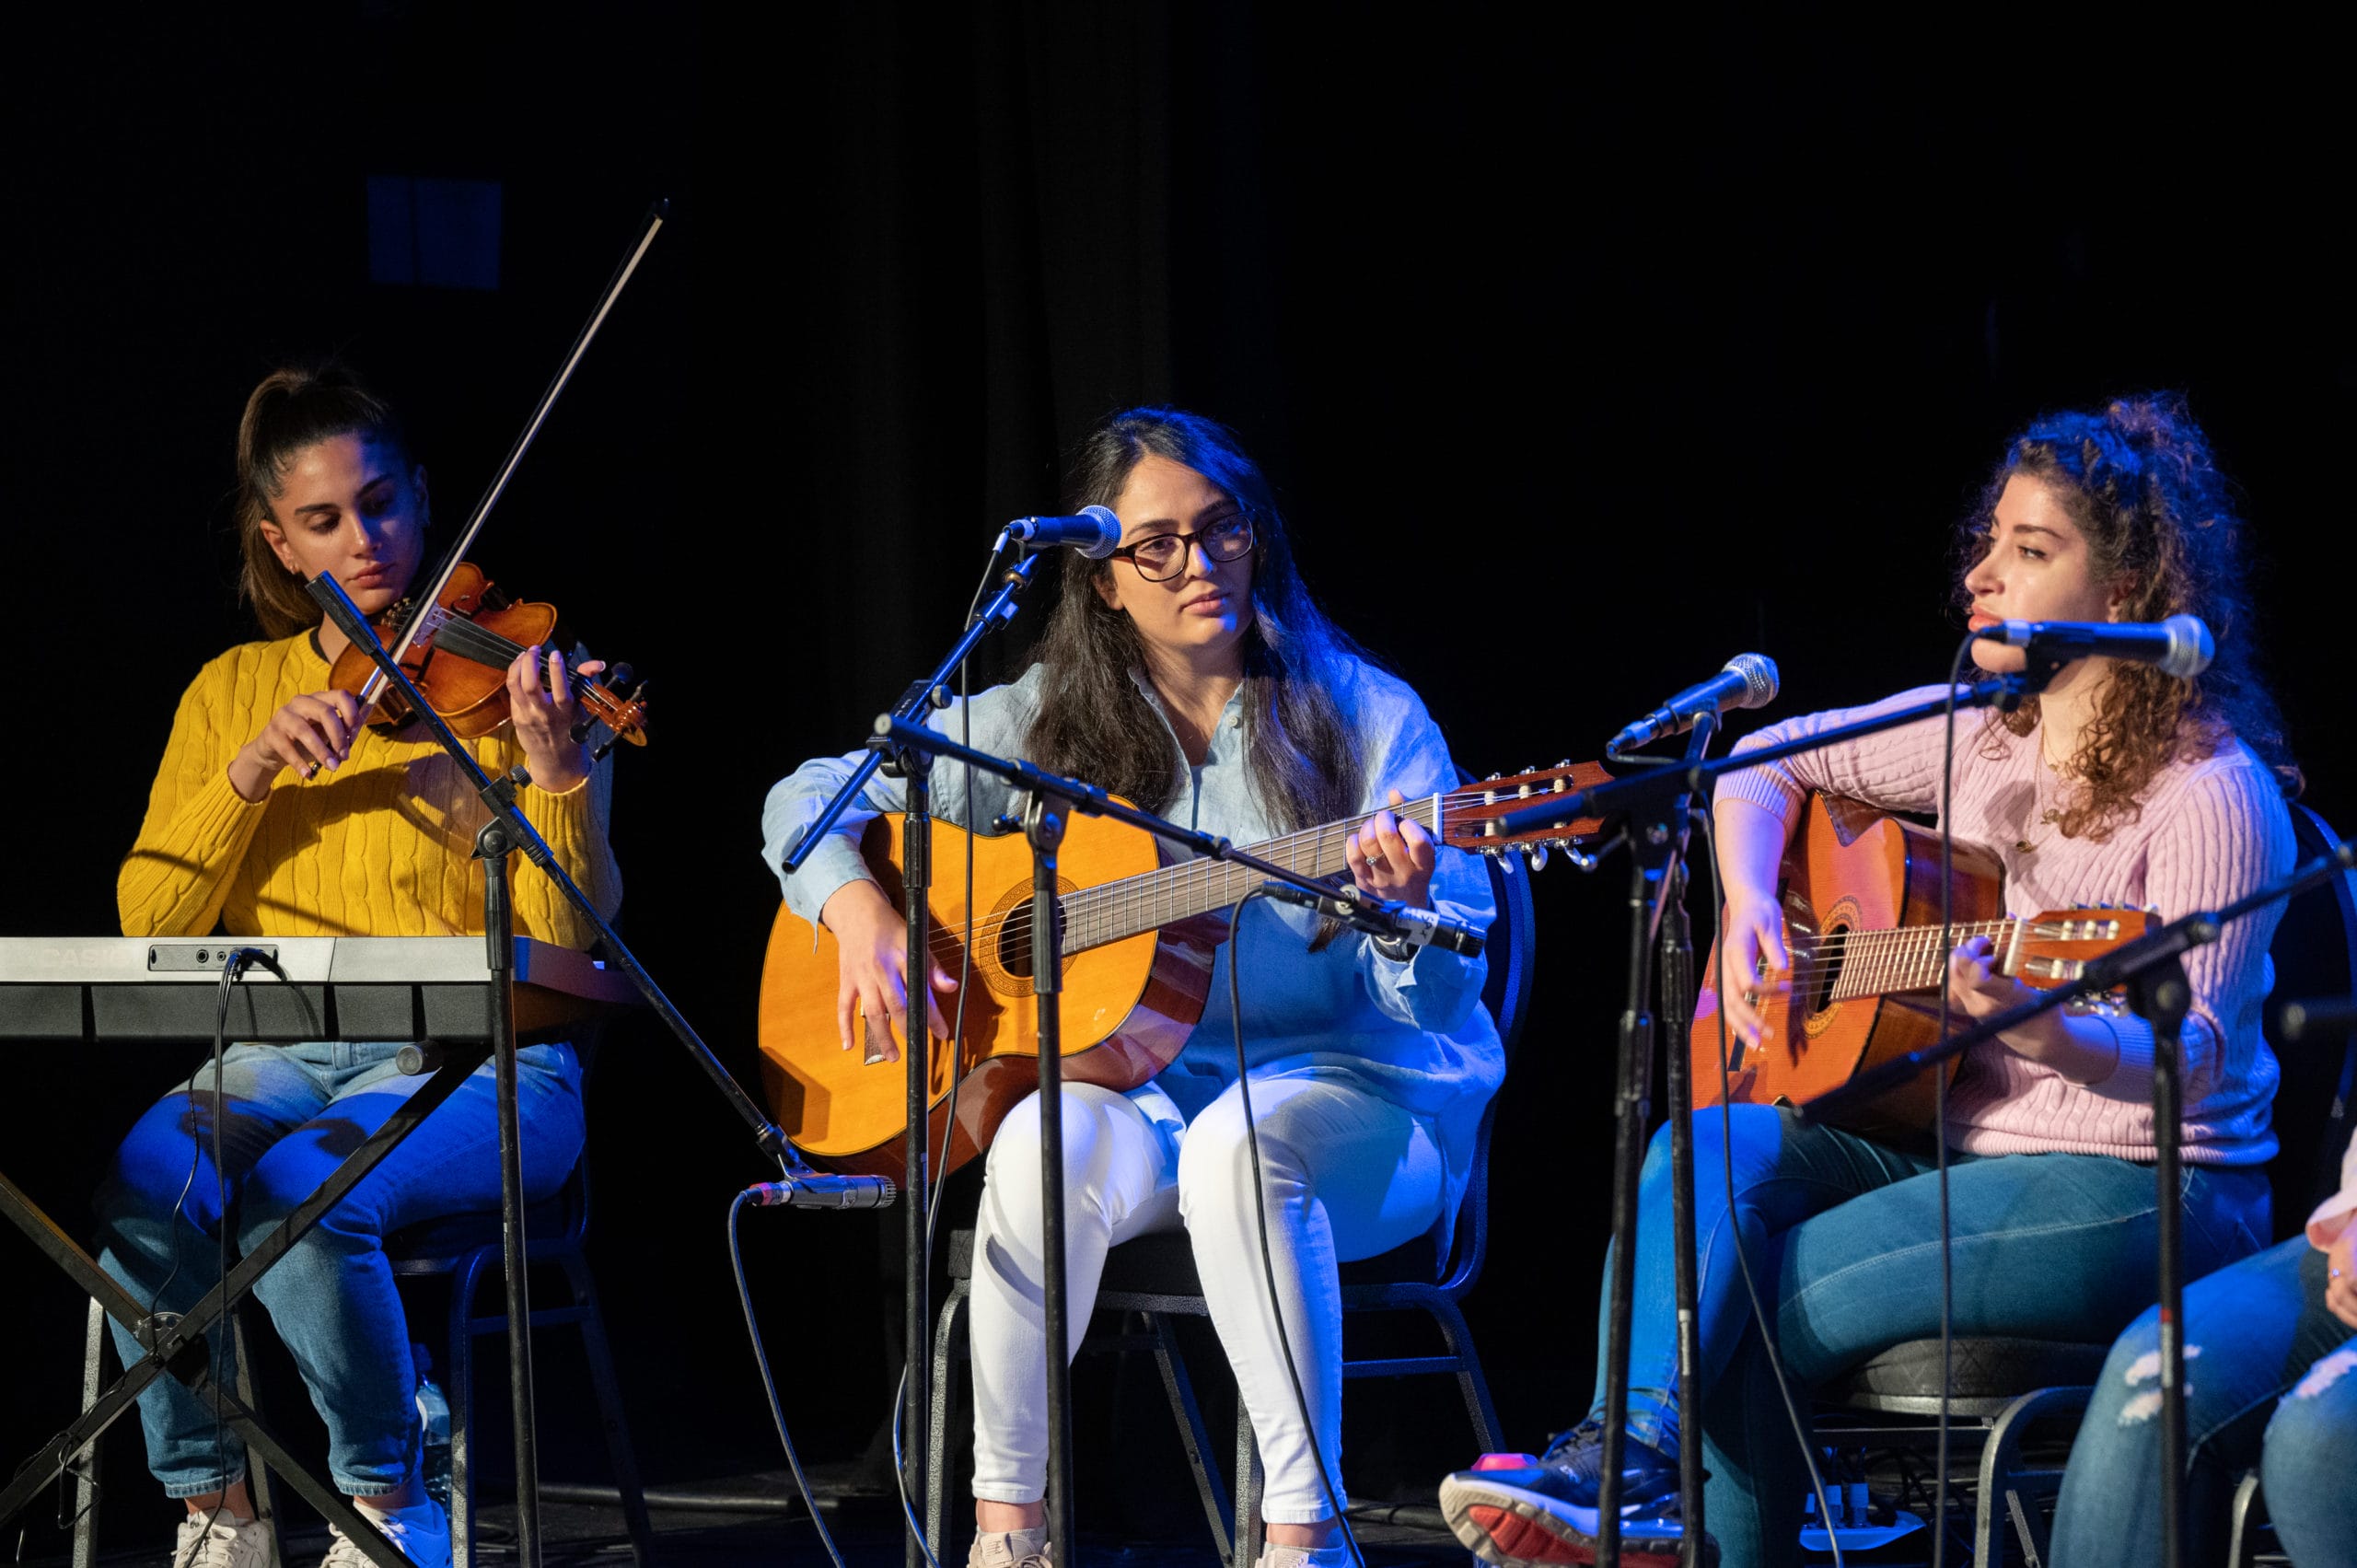 Three female musicians onstage. A violinist on the left and two acoustic guitarists on the right. They are all wearing jeans and sweatshirts.